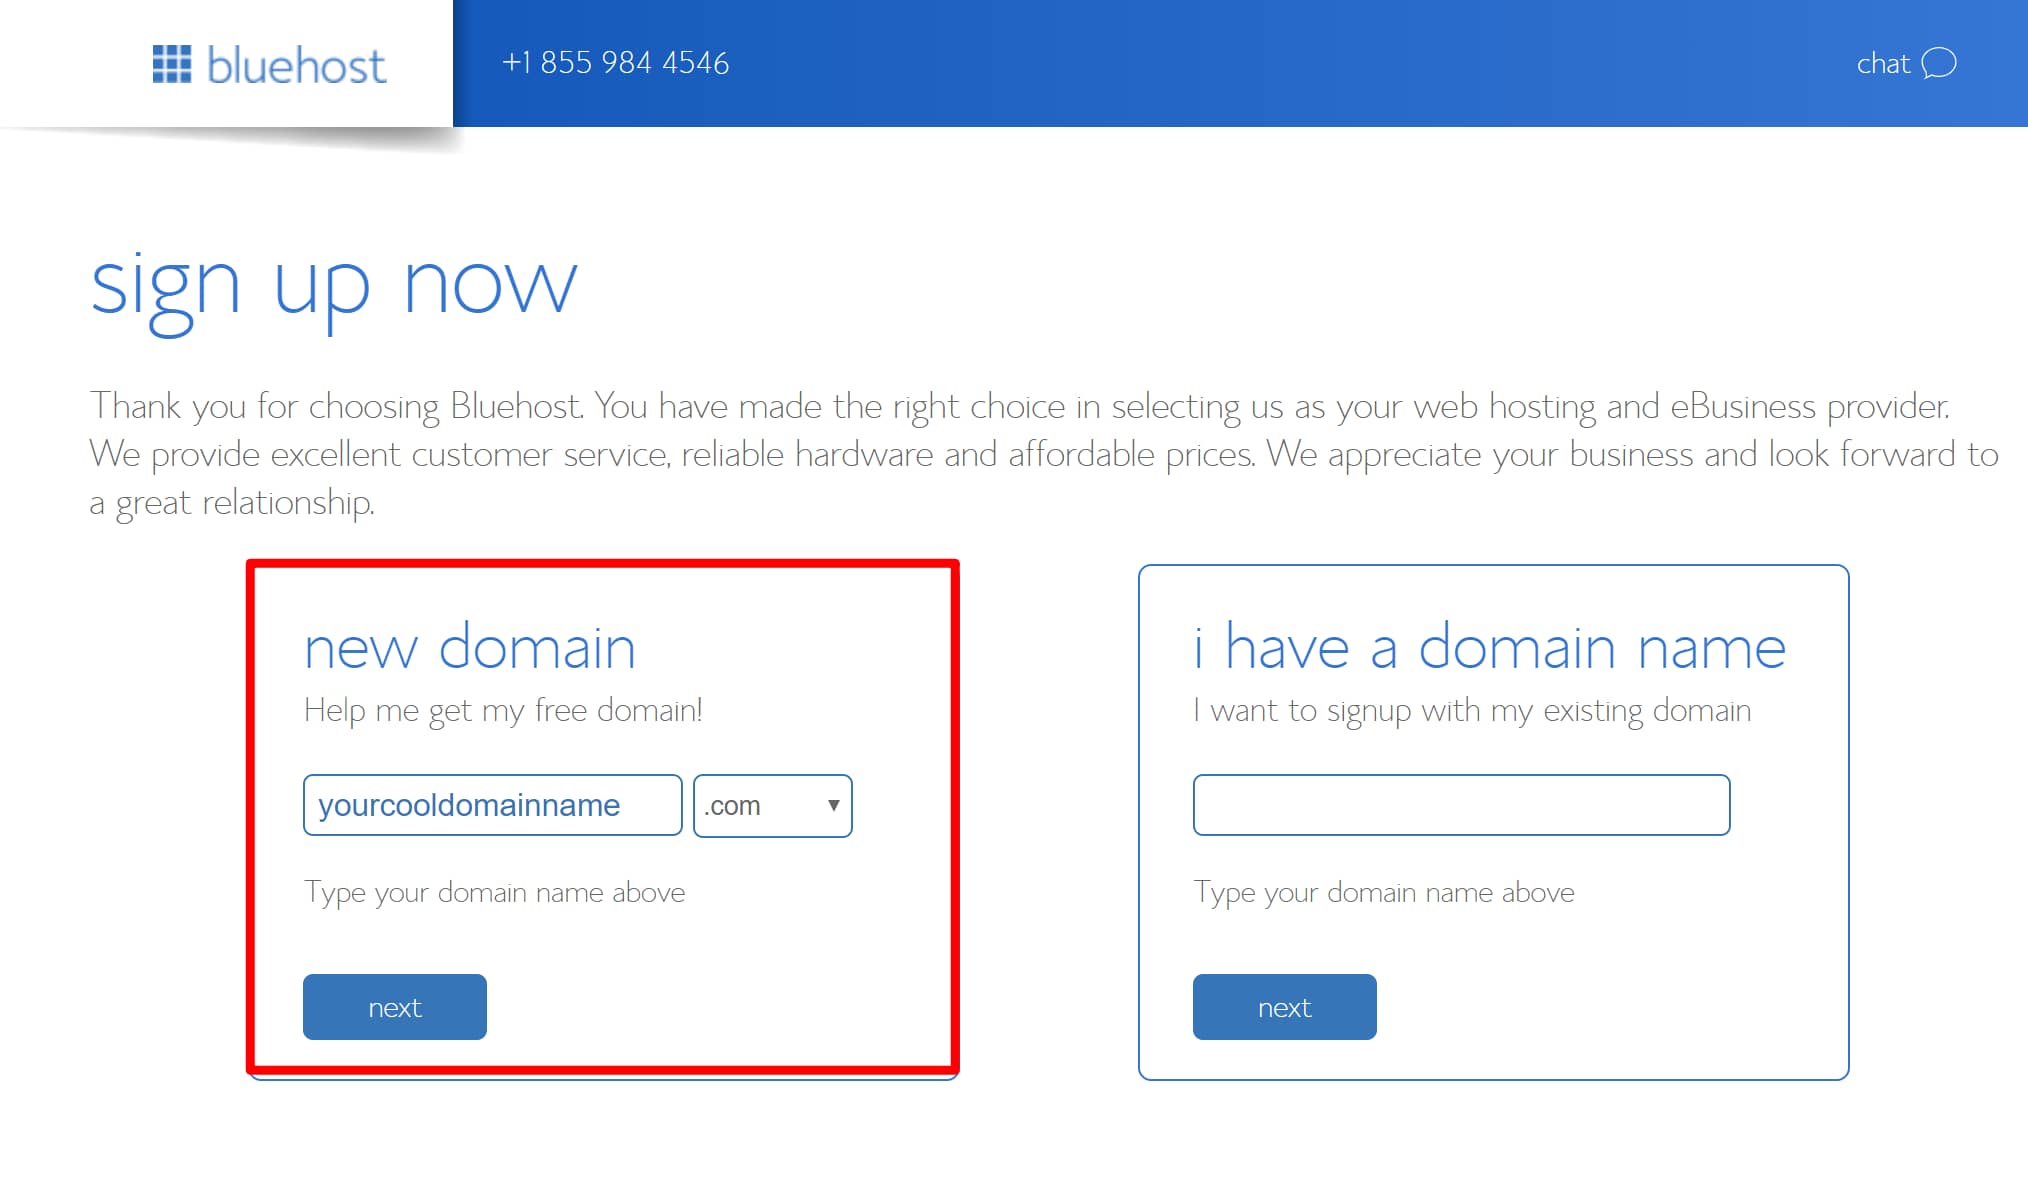 Choose your free domain name.